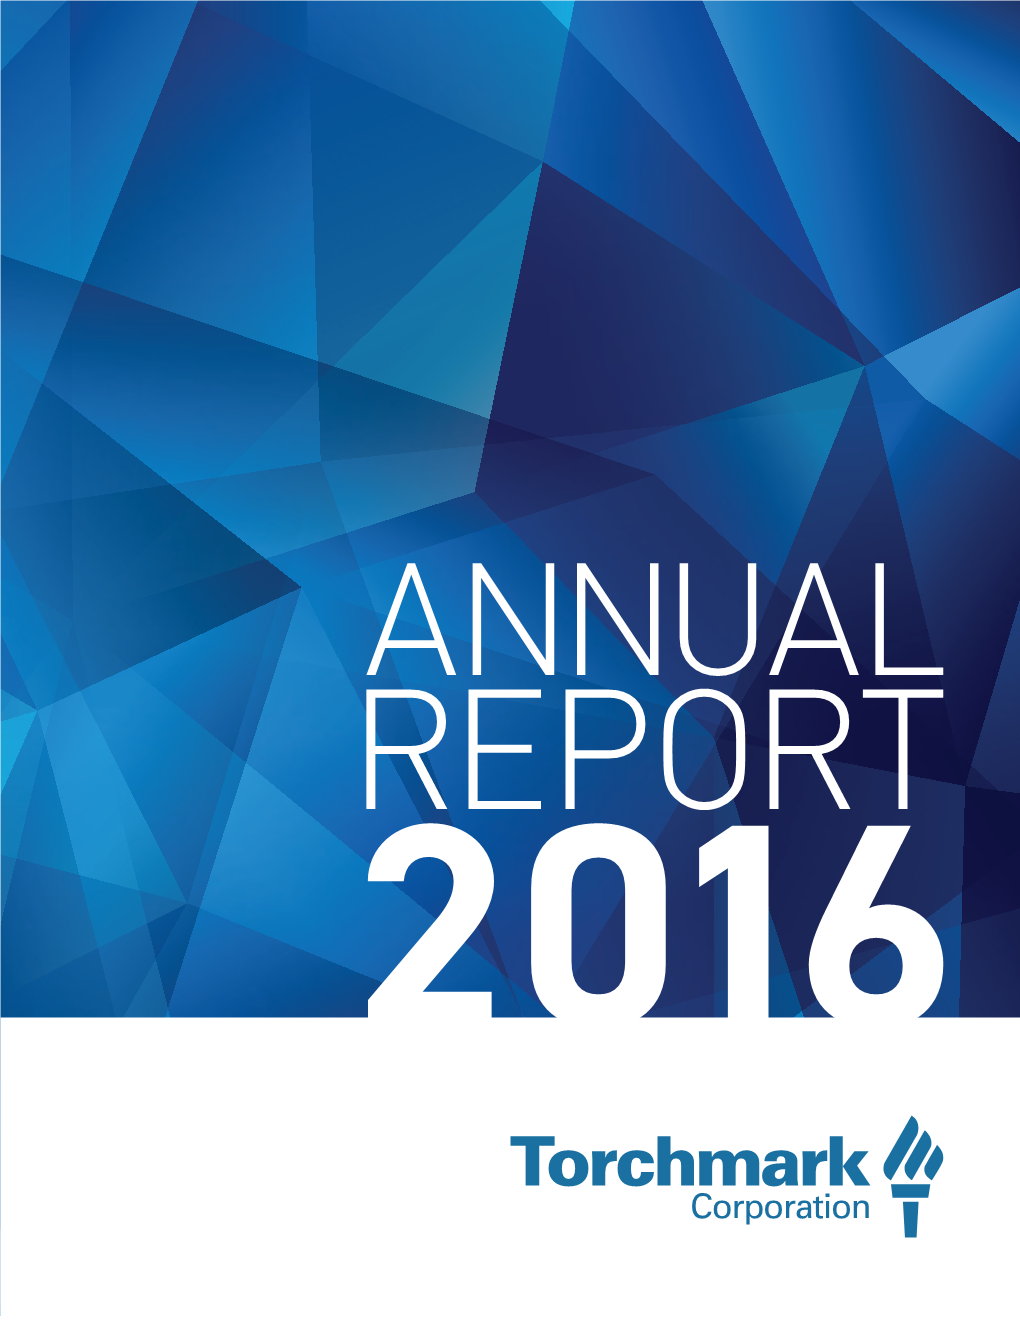 2016 Annual Report and Form 10-K